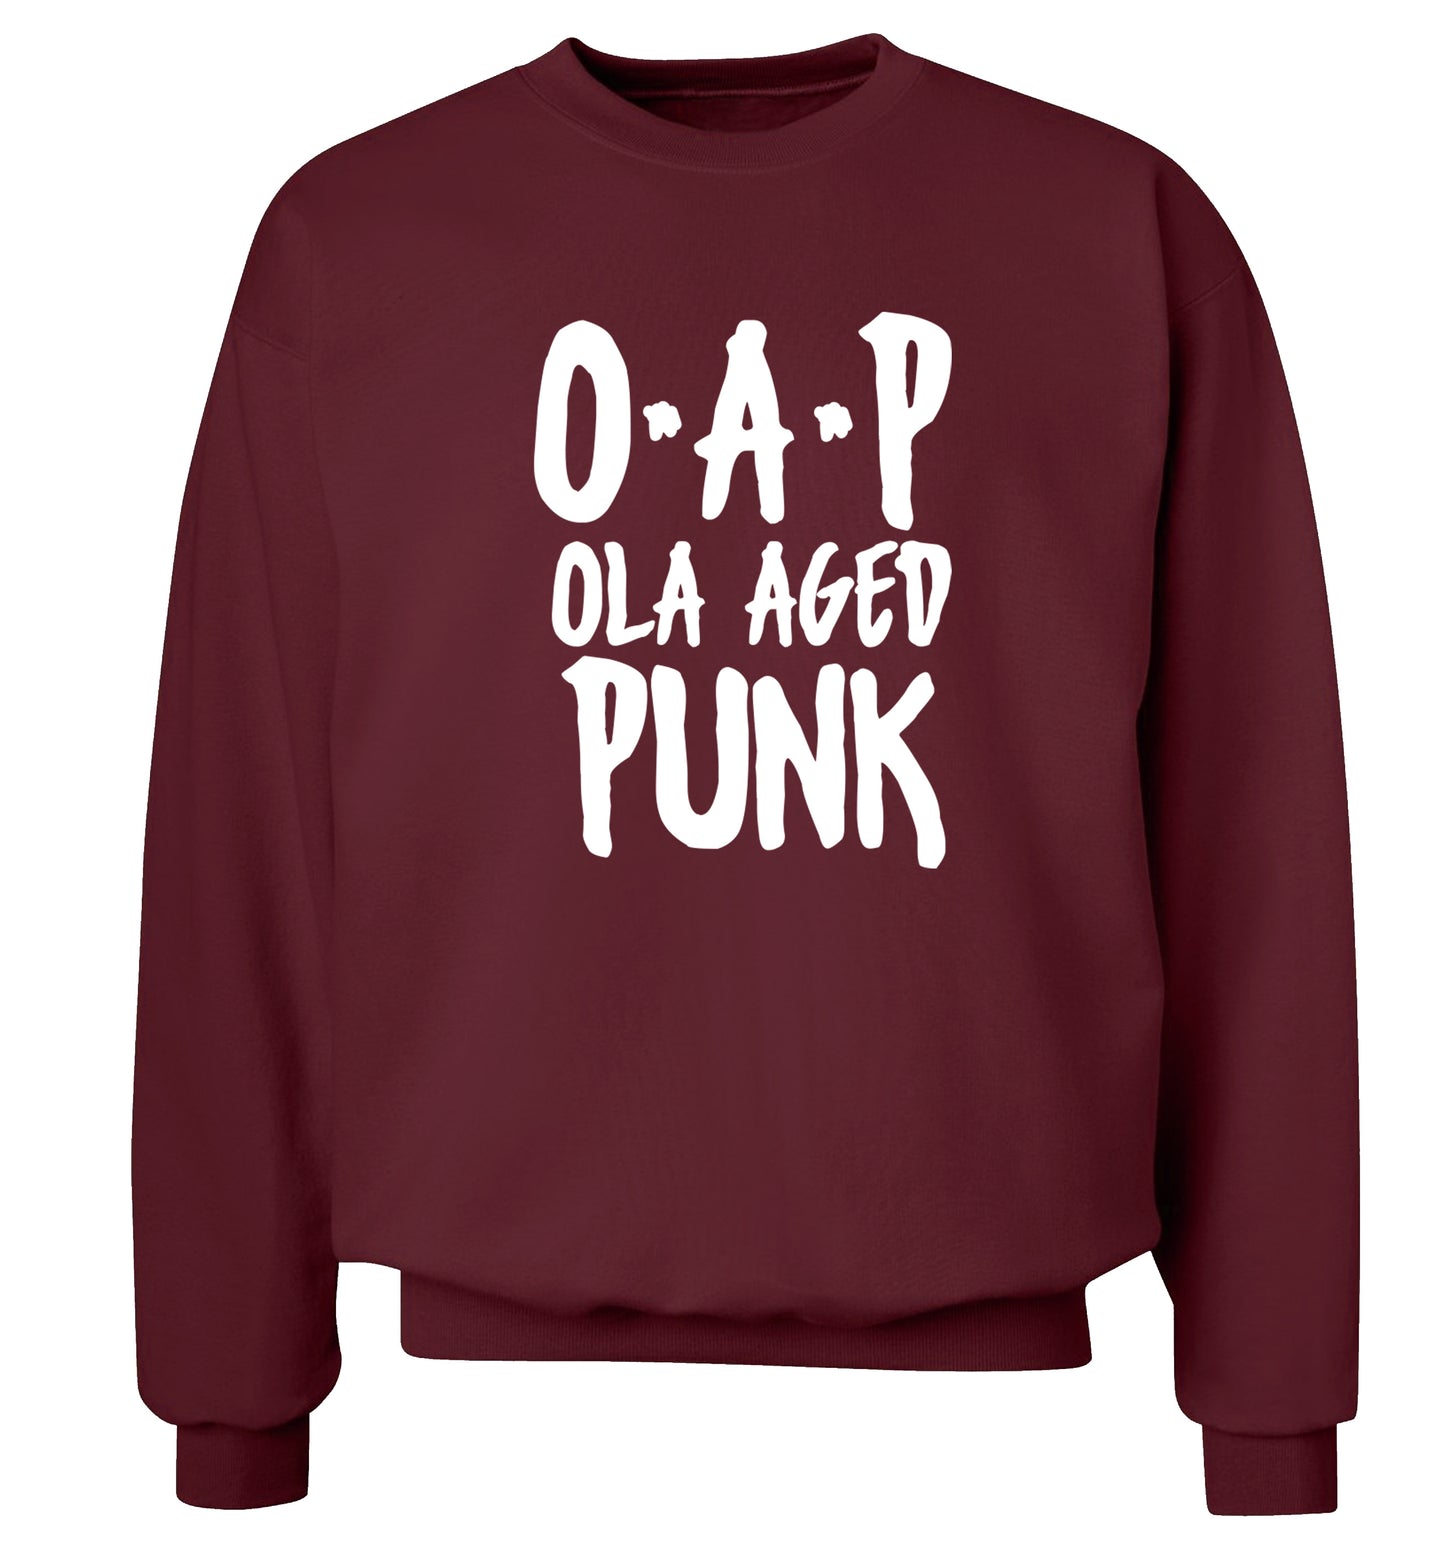 O.A.P Old Aged Punk Adult's unisex maroon Sweater 2XL